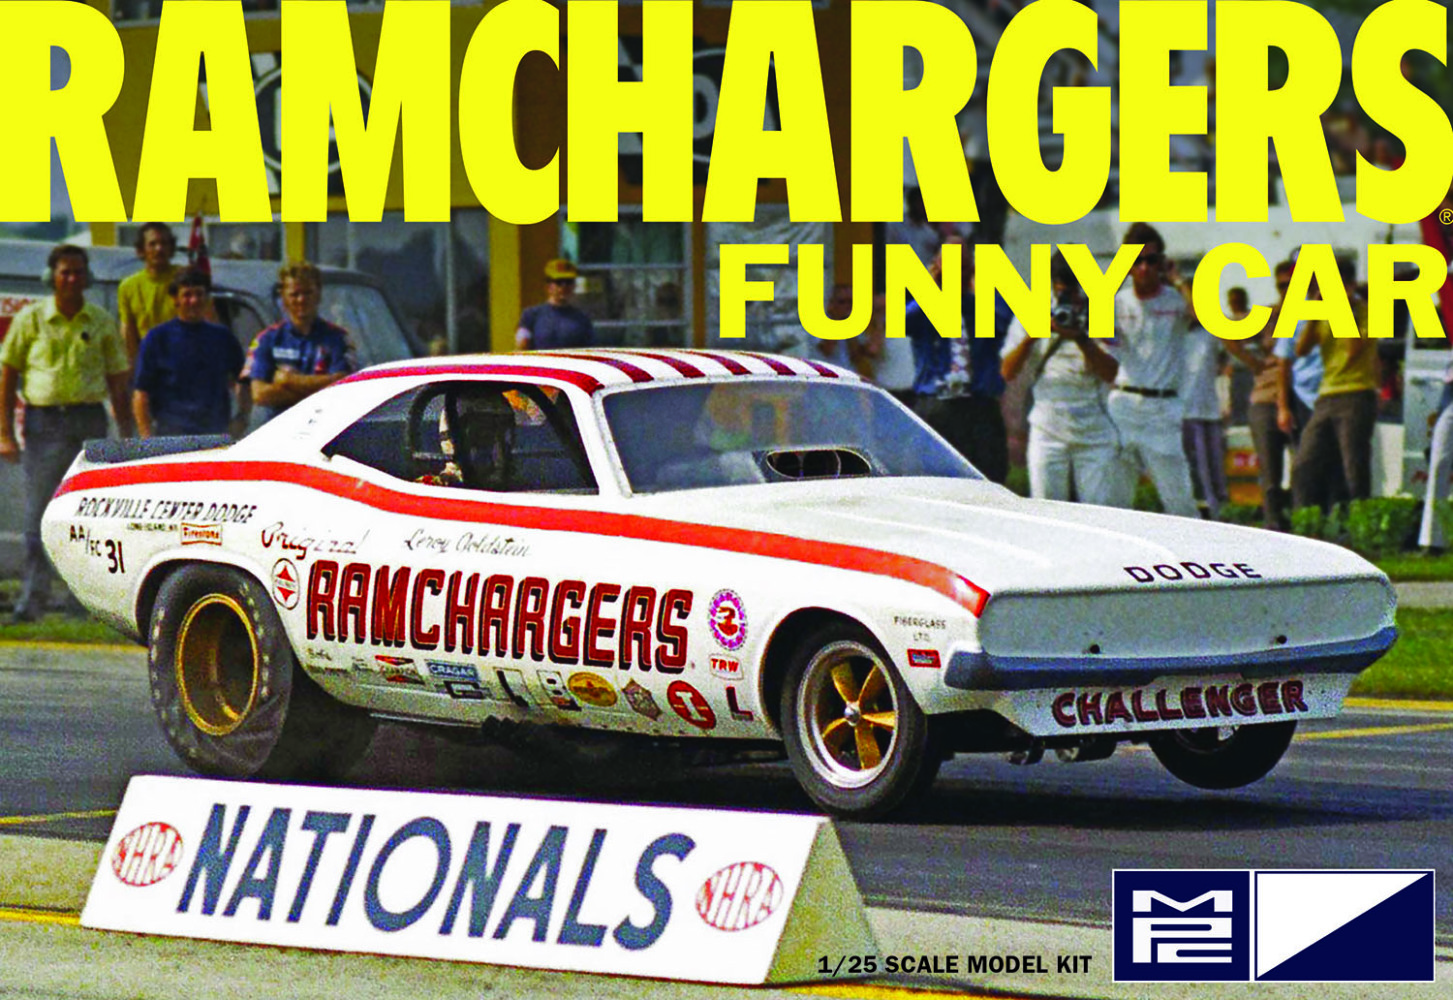 RAMCHARGERS DODGE CHALLENGER FUNNY CAR